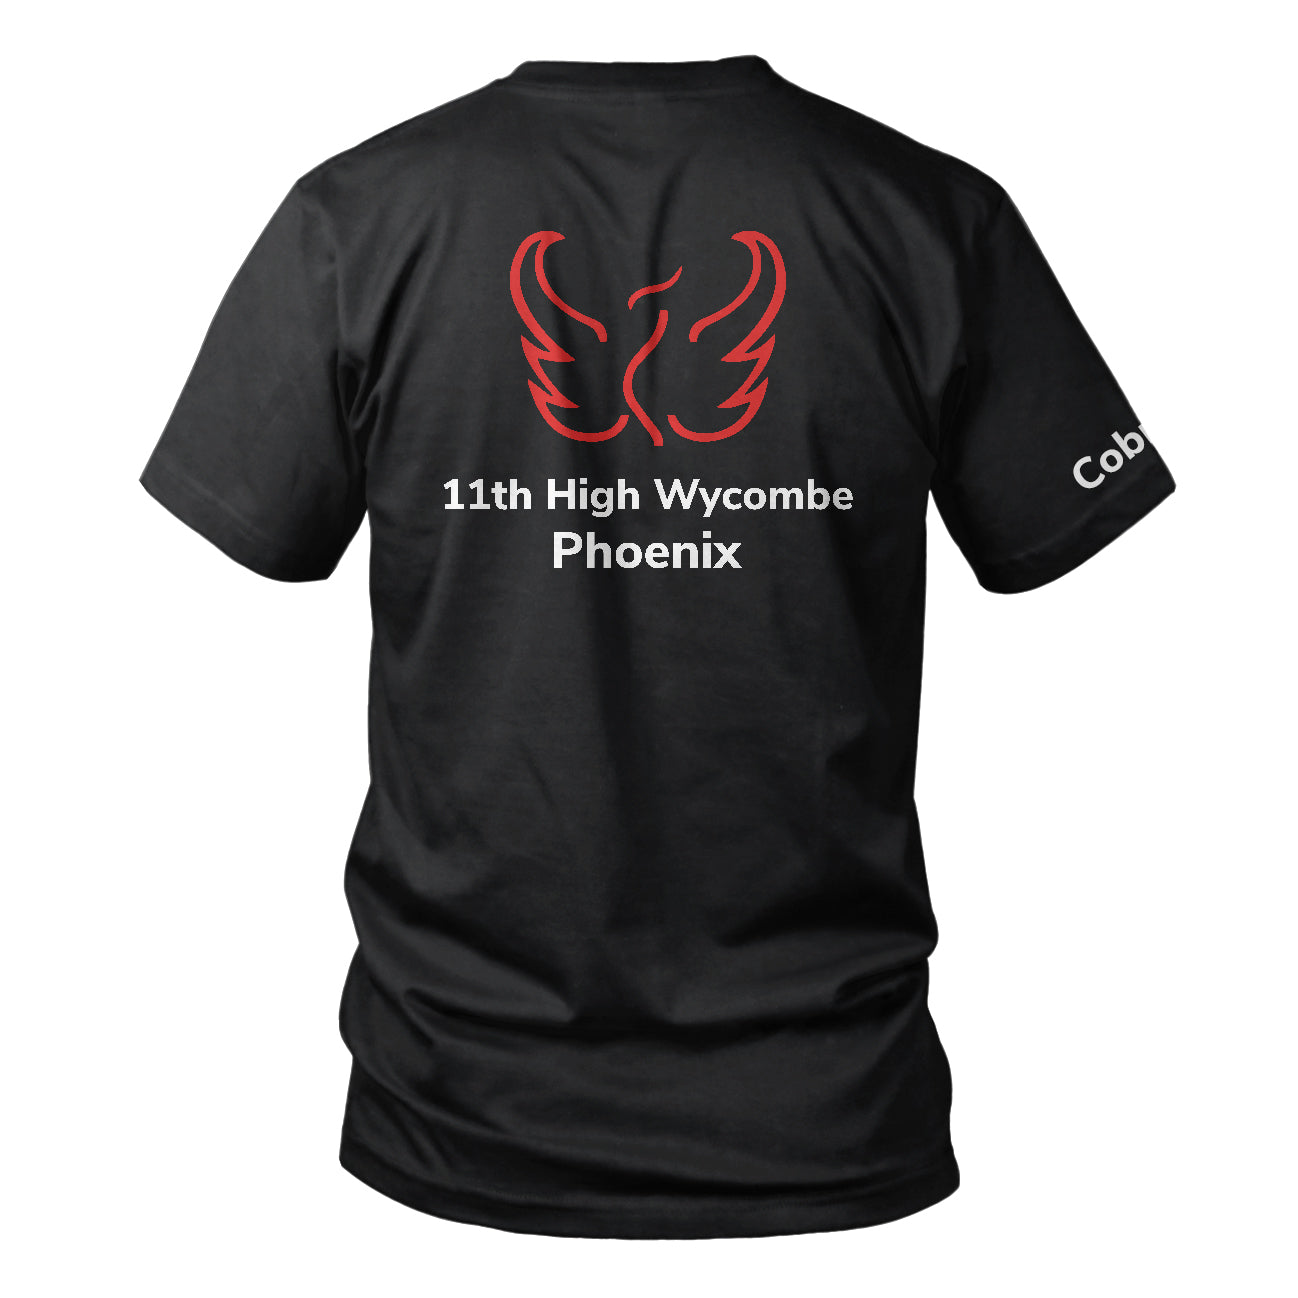 11th High Wycombe Phoenix Black T-Shirt Scouts Leader